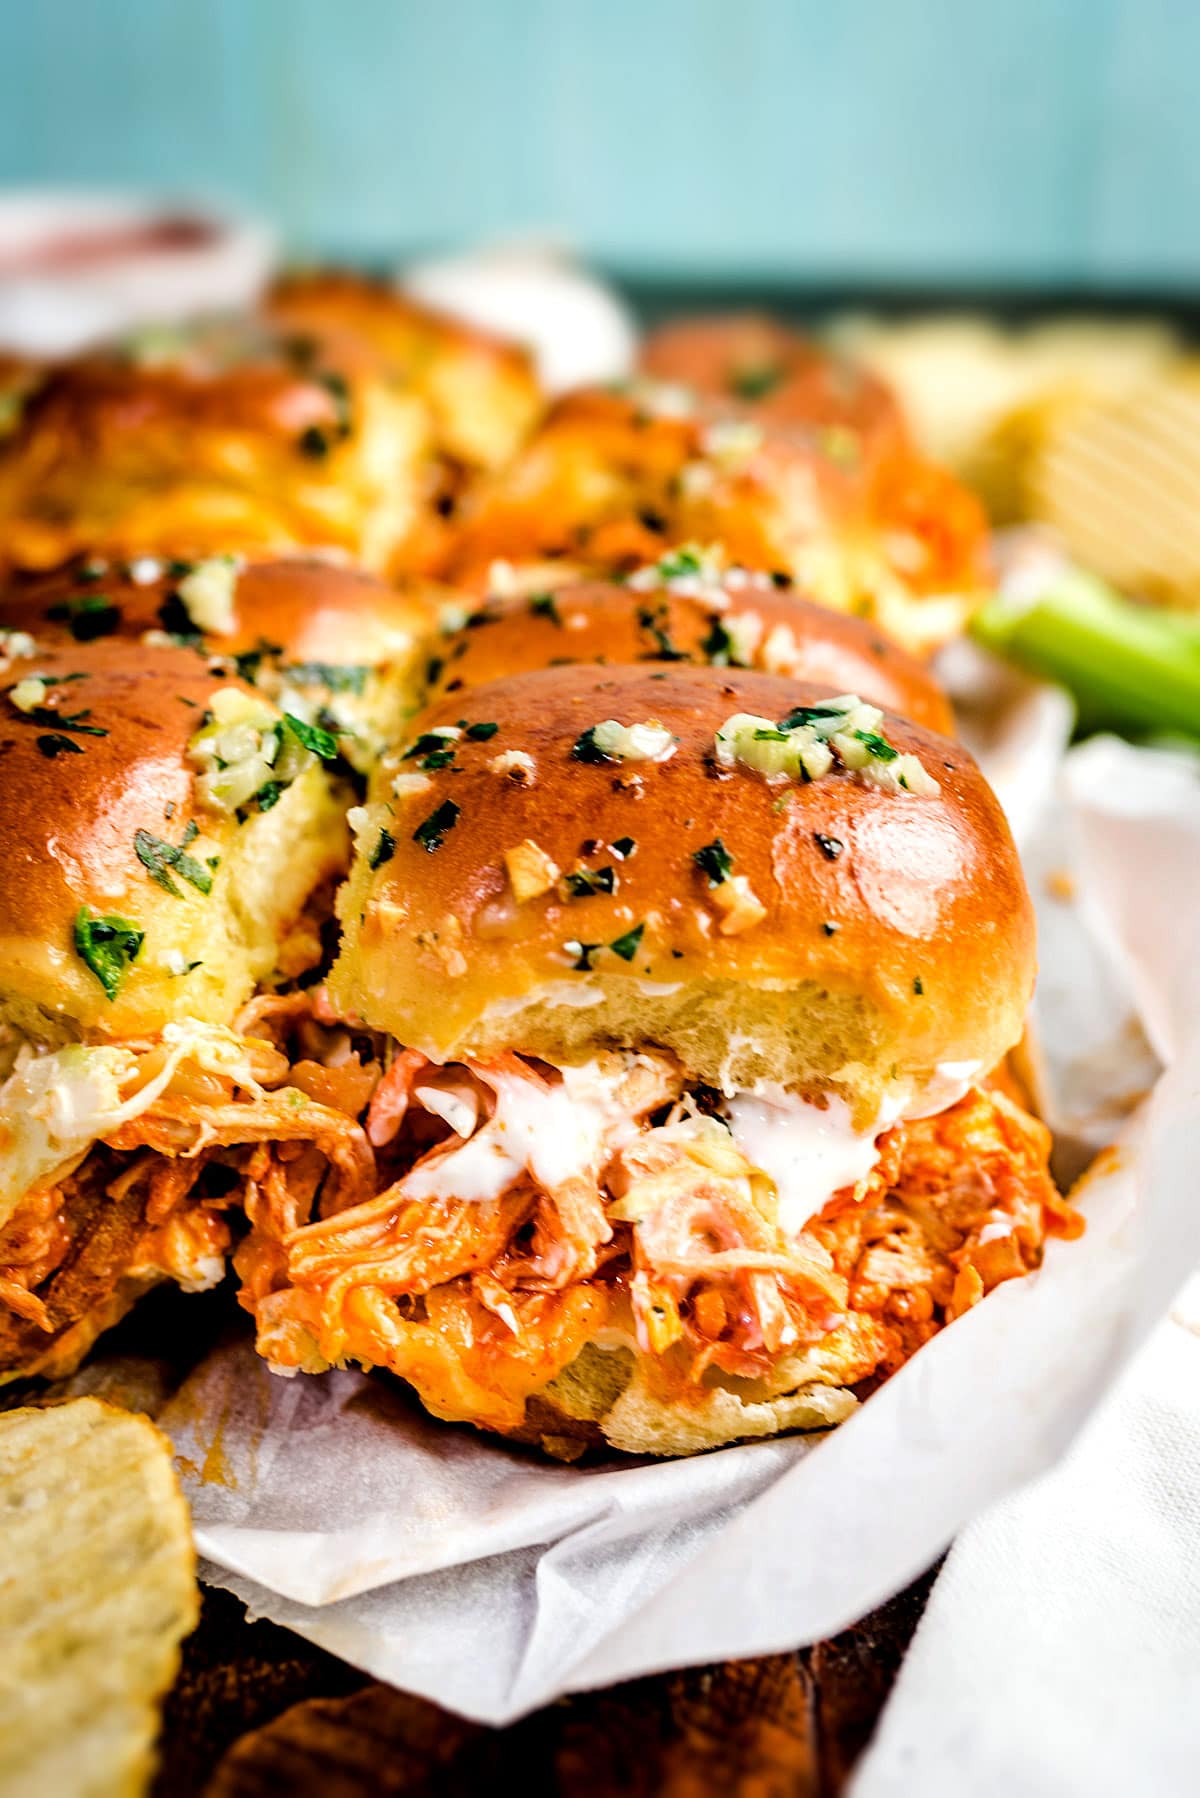 These Buffalo Chicken Sliders are loaded up with spicy buffalo sauce-tossed chicken, gooey melted cheese, and creamy ranch slaw, all nestled between garlic-butter brushed brioche buns. 